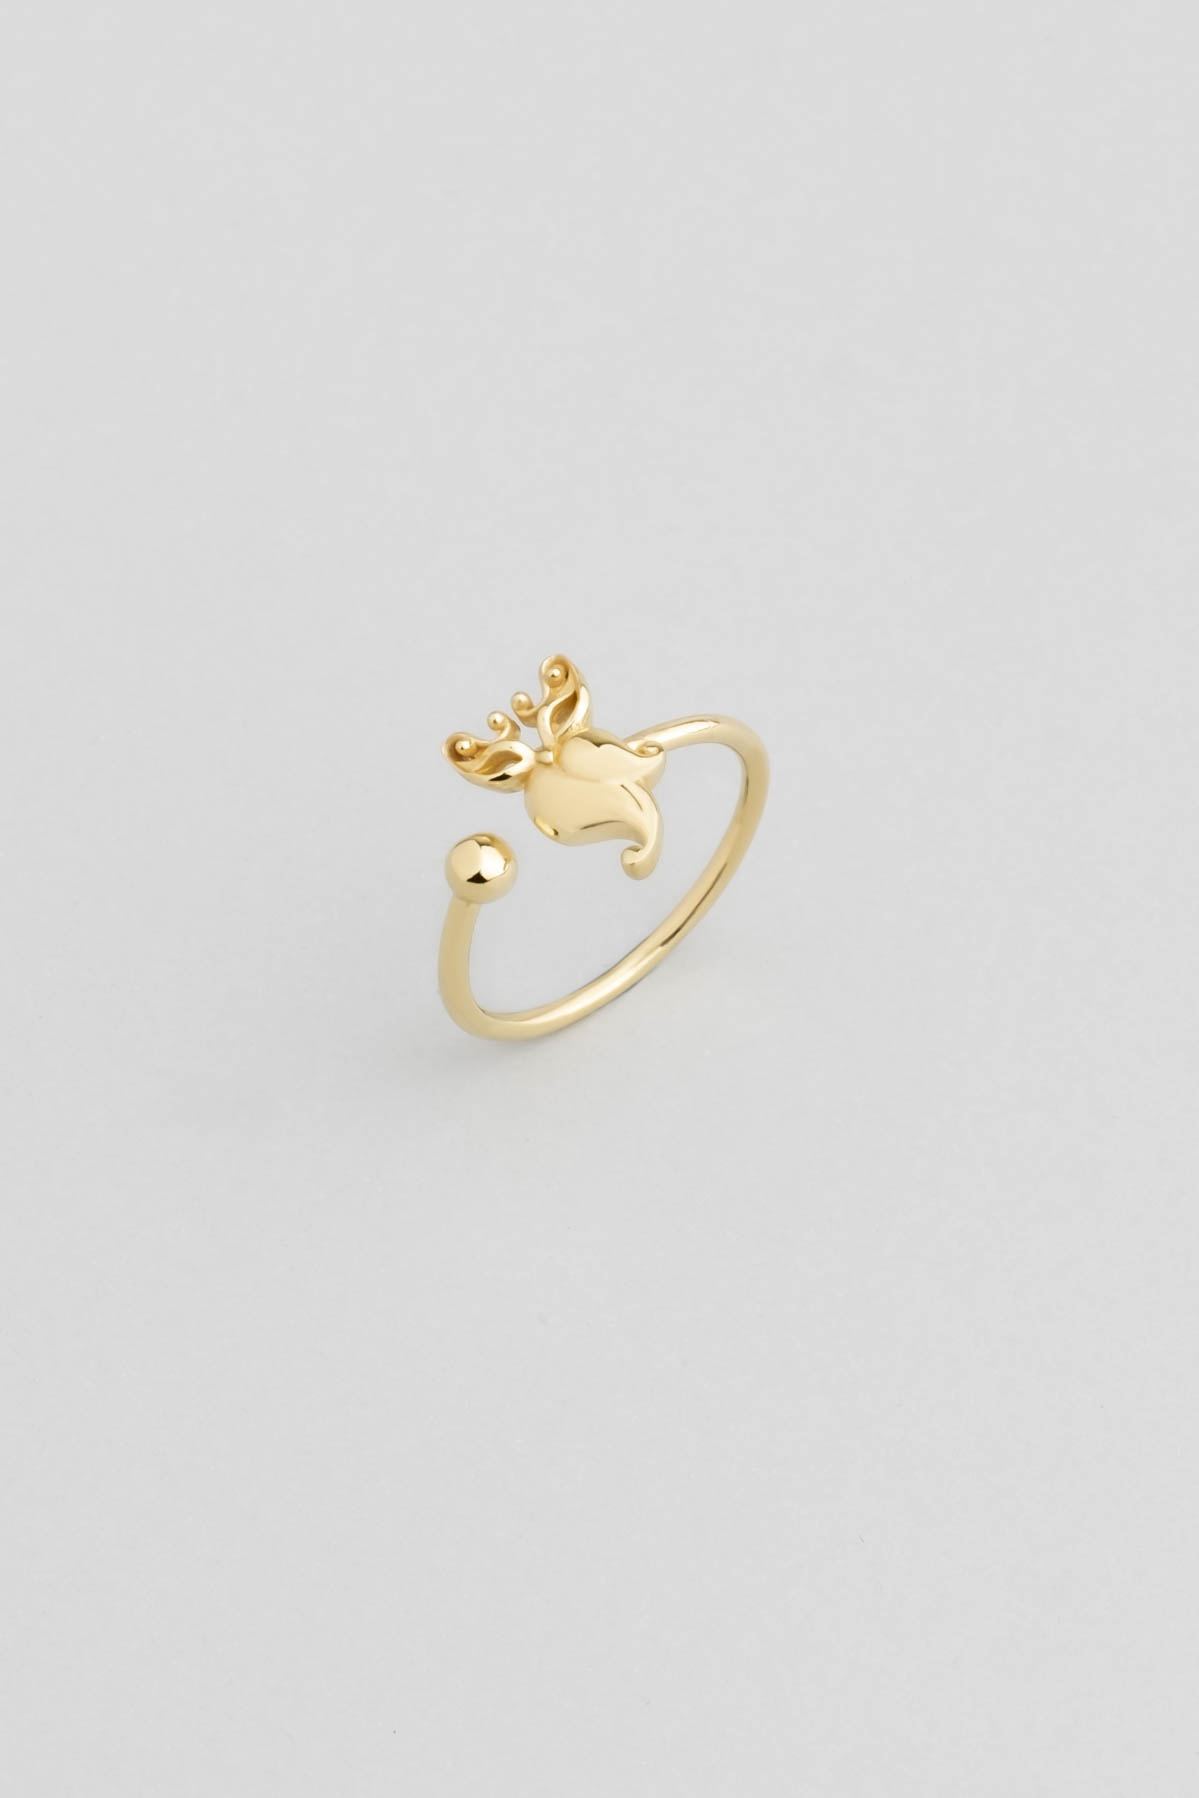  Mystic Dream 18 Karat Yellow Gold Plated Silver Owl Ring